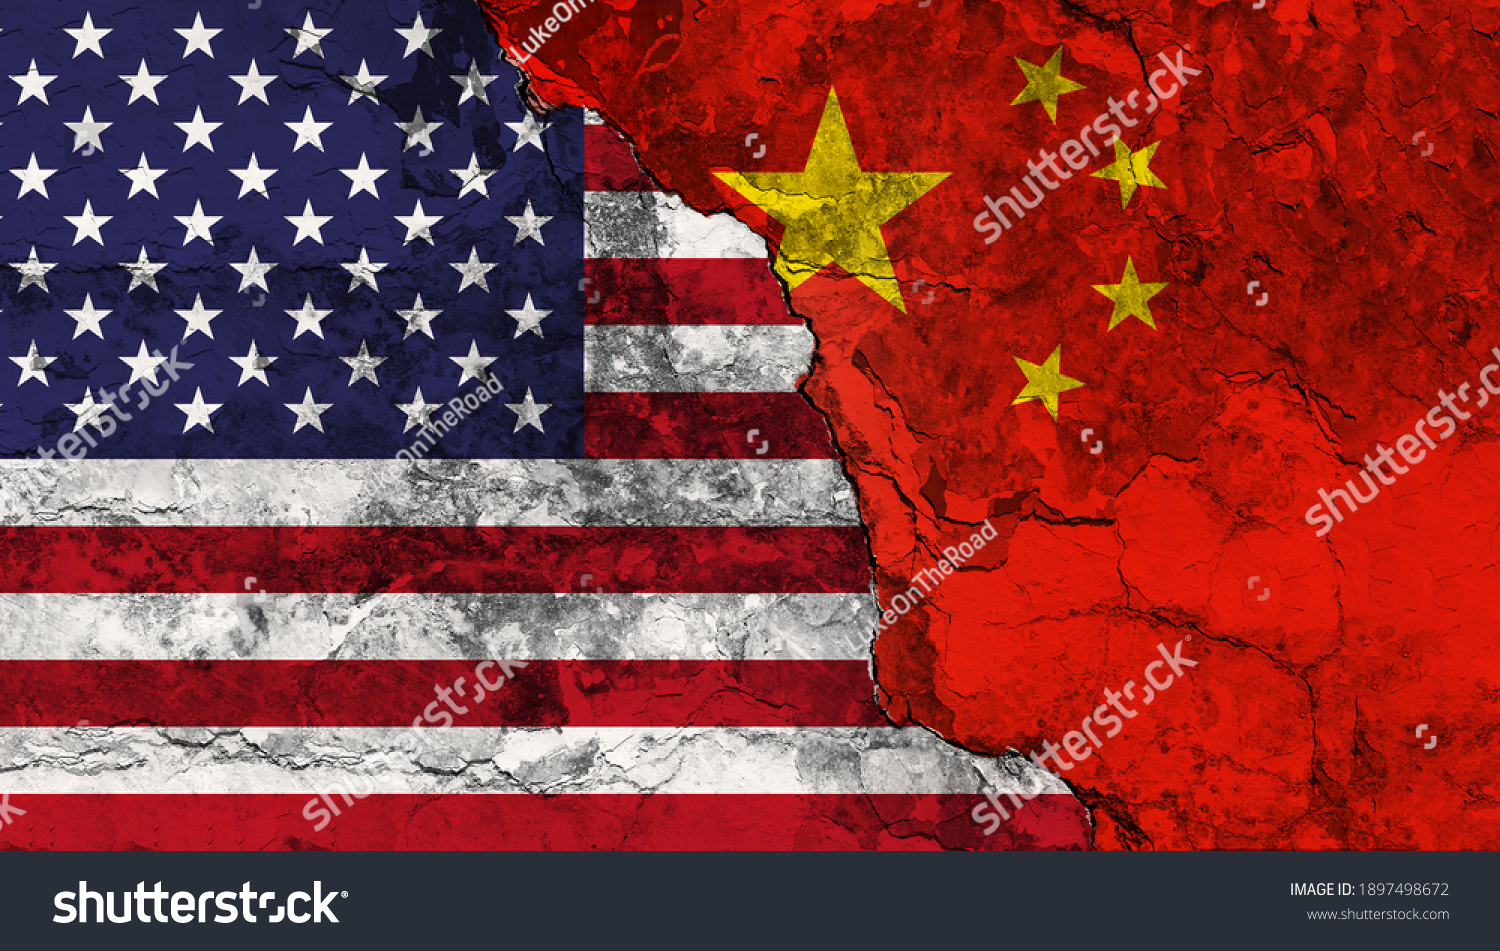 Concept of the Conflict between the United States of America and the Peoples Republik of China with painted flags on a wall with a crack #1897498672